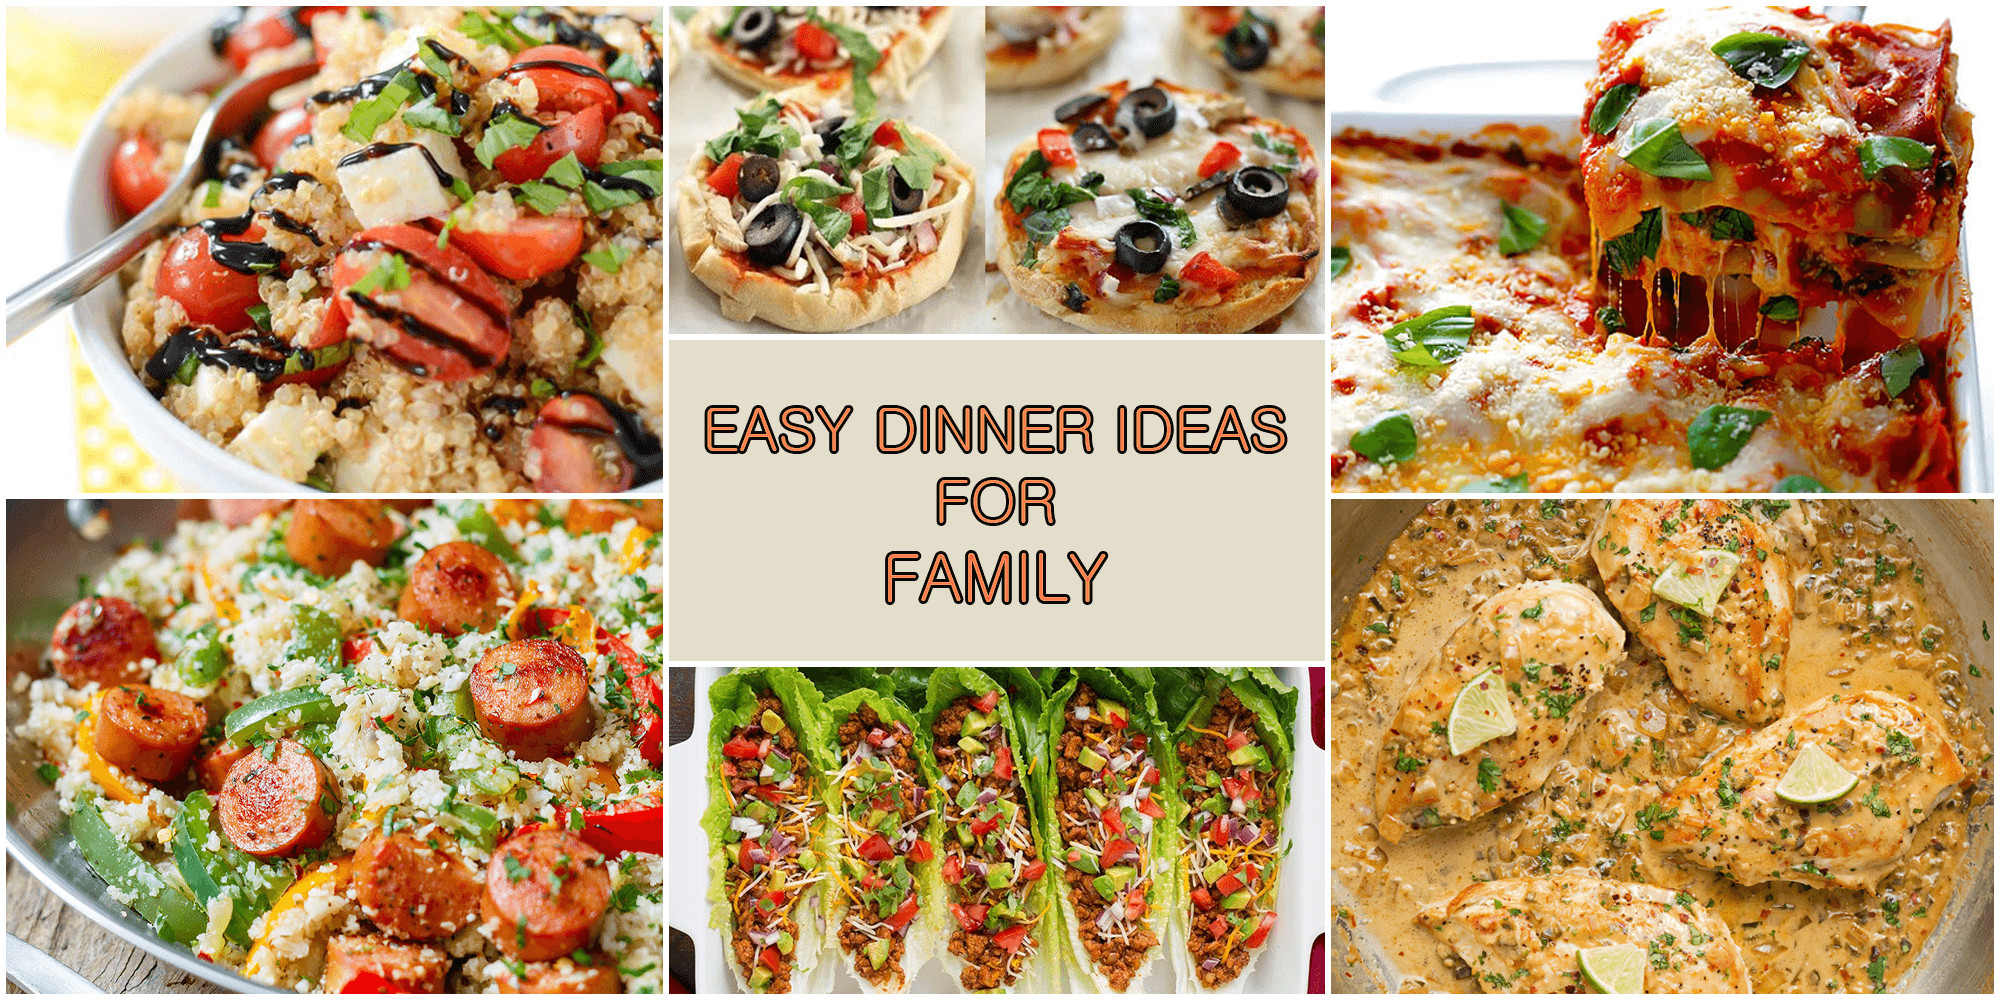 Dinner Ideas For Families
 Healthy and Easy Dinner Ideas For Family